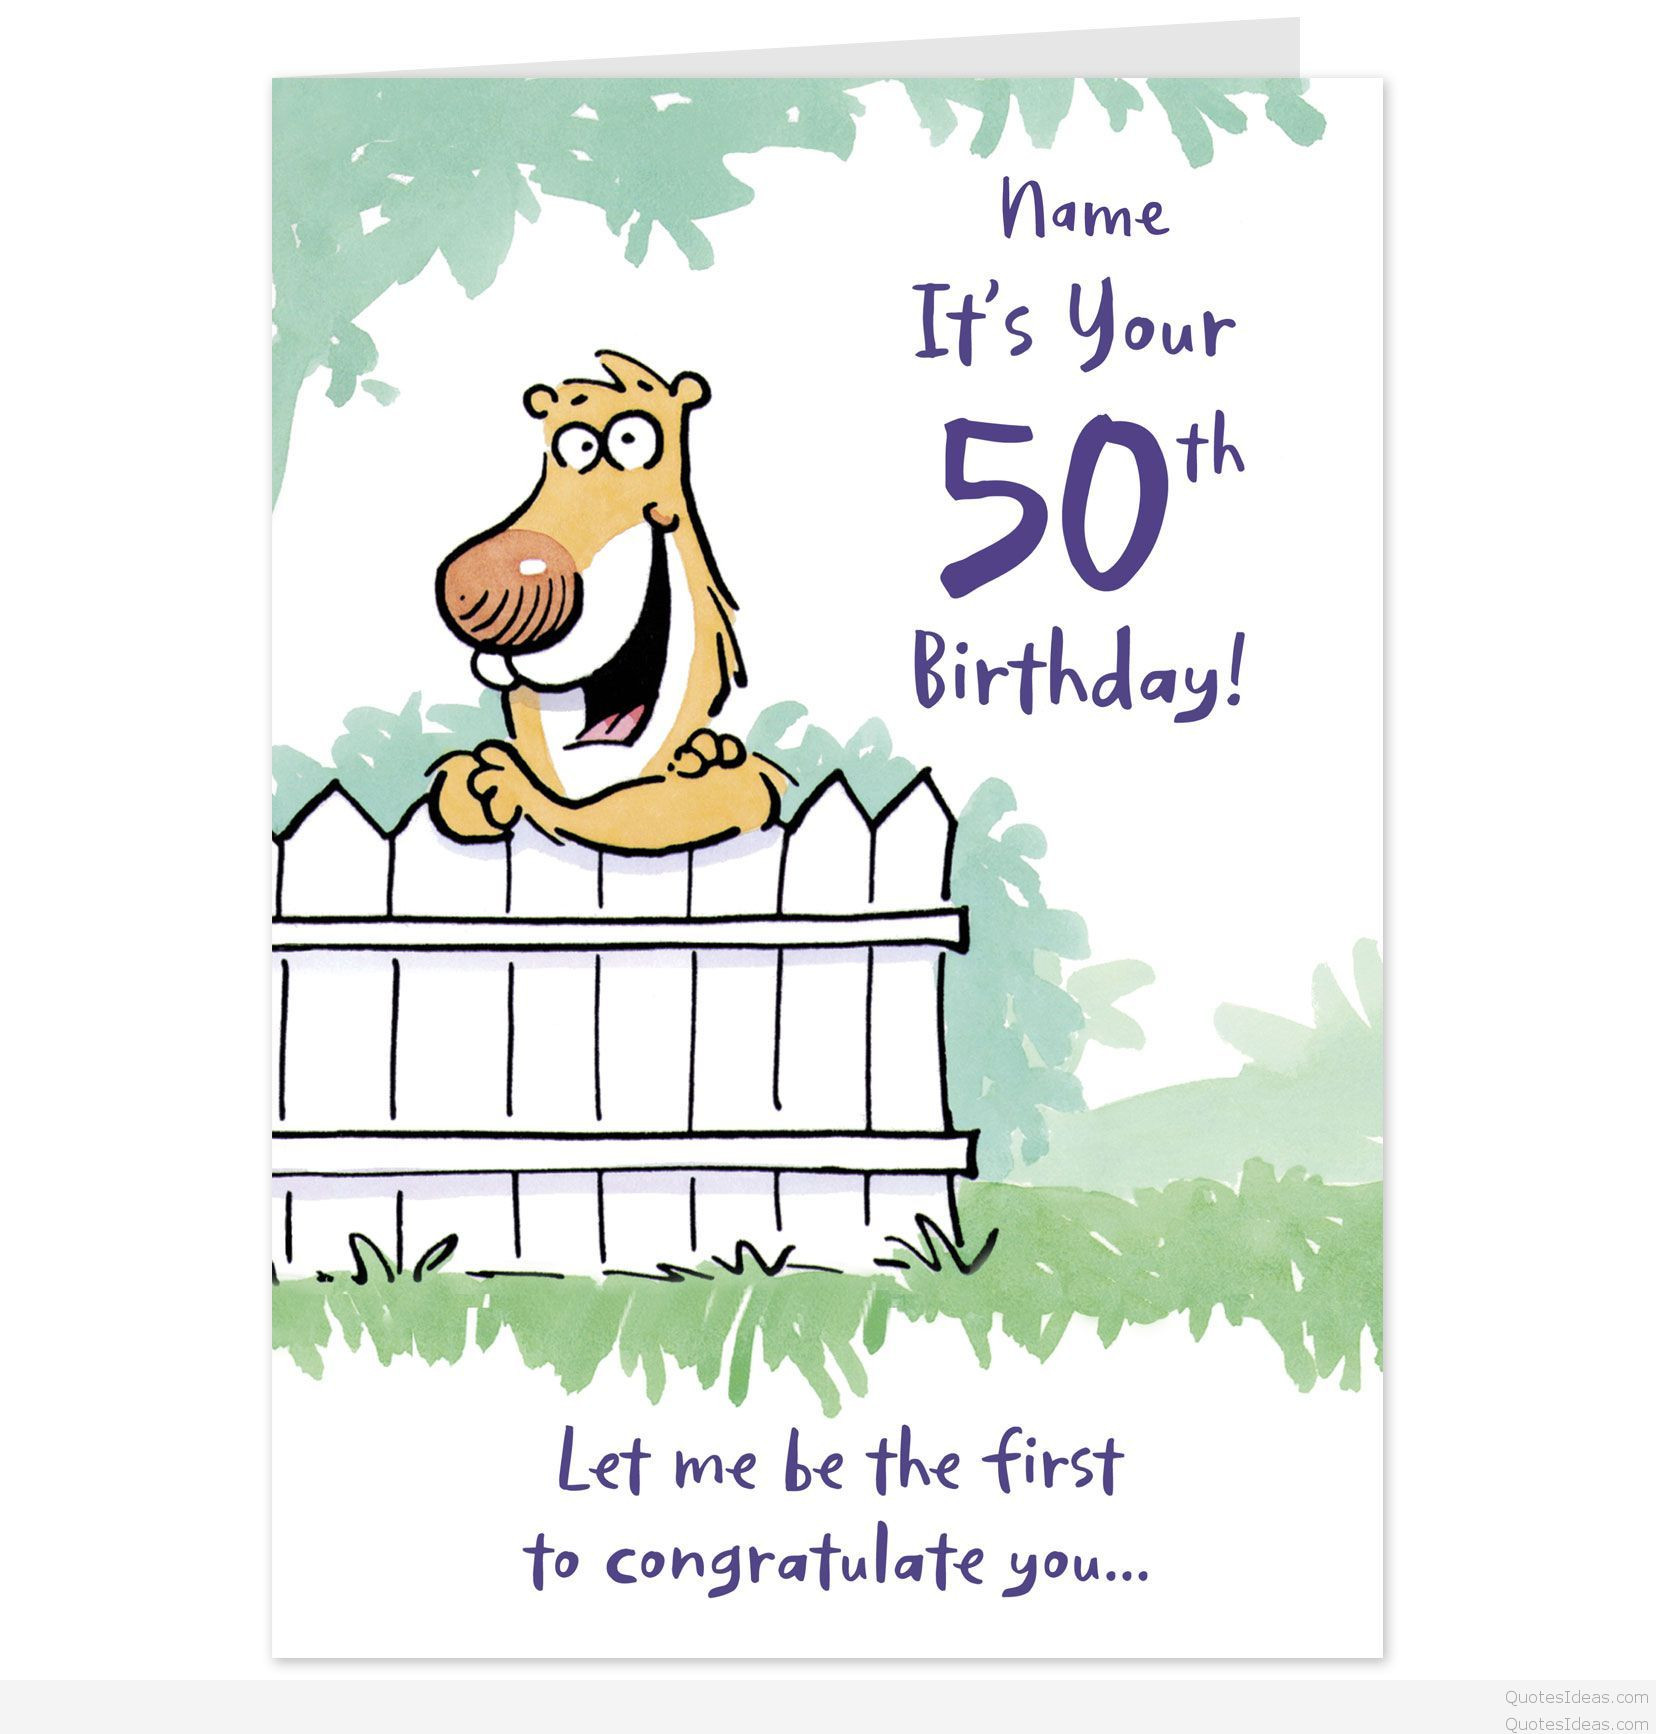 Funny Happy Birthday Quotes For Her
 Latest funny cards quotes and sayings